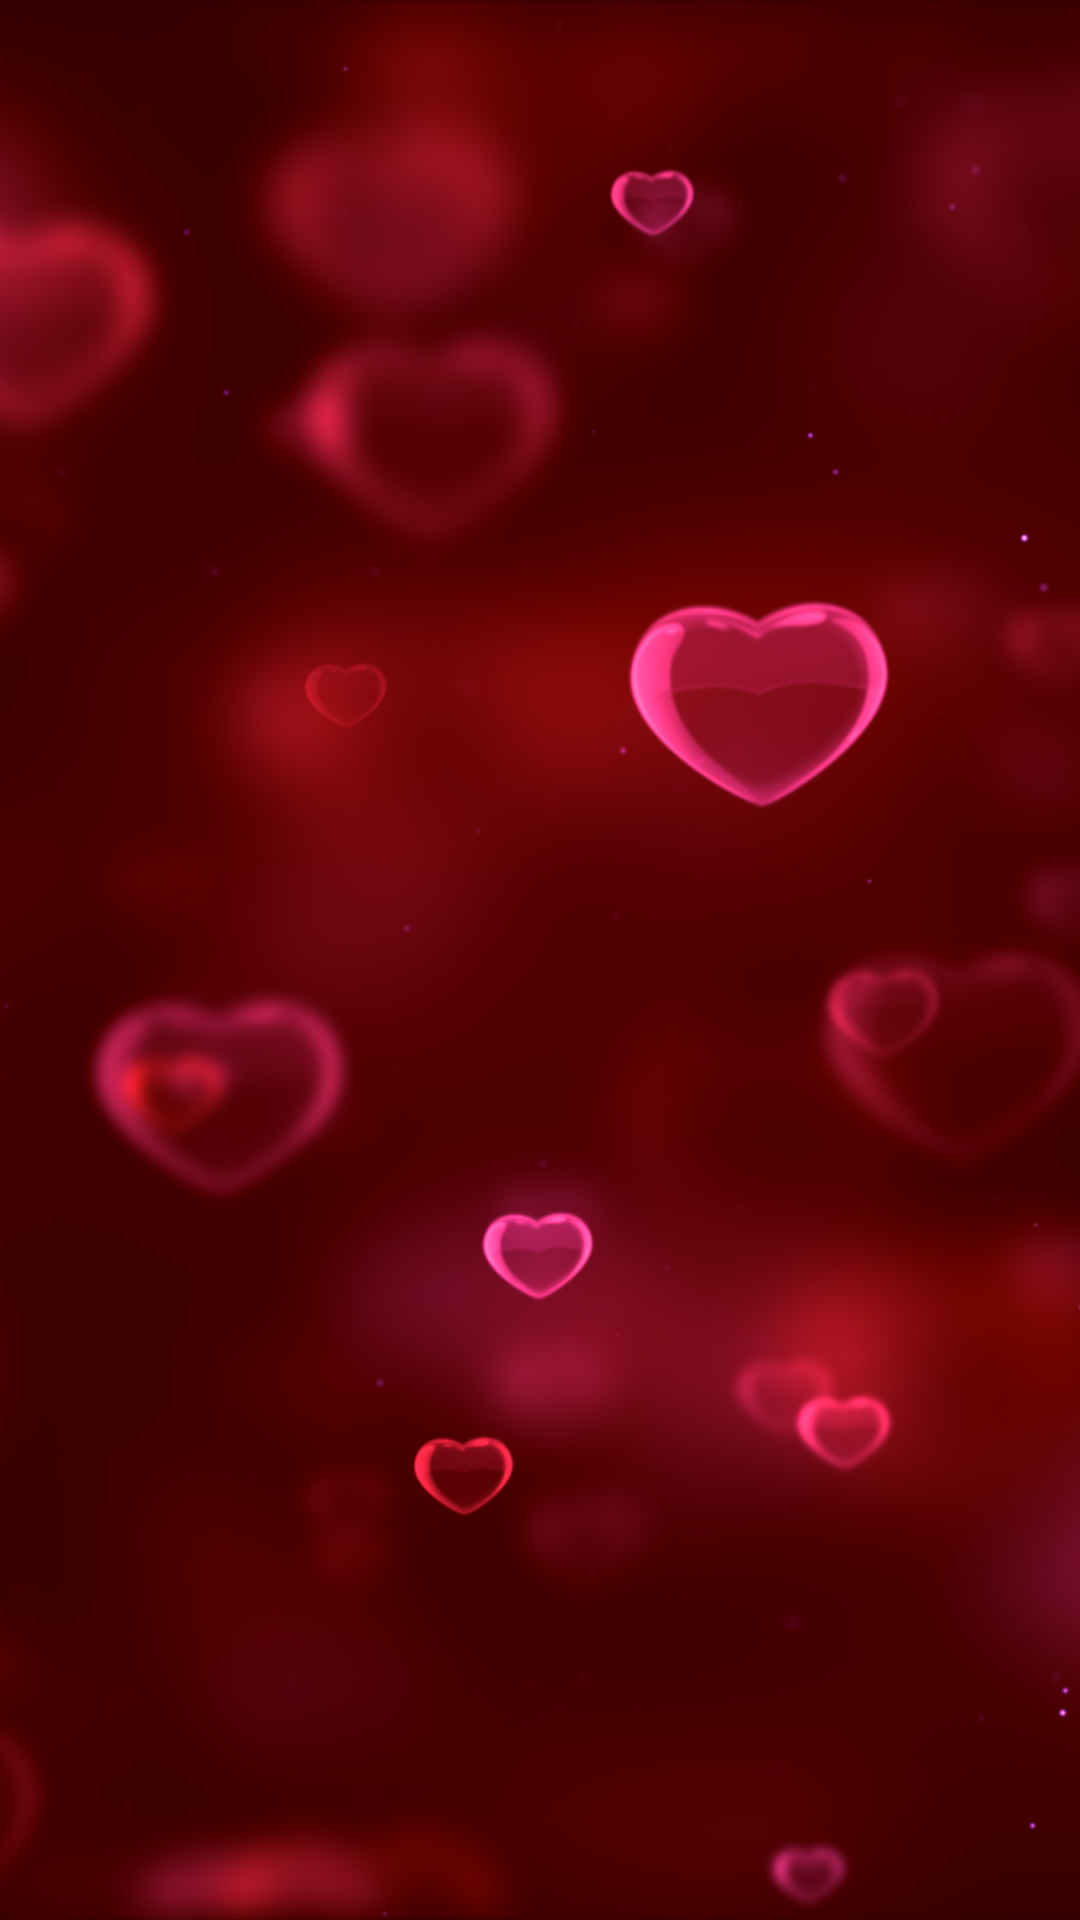 Glossy White Red Hearts 4K HD Valentines Day Wallpapers  HD Wallpapers   ID 60519